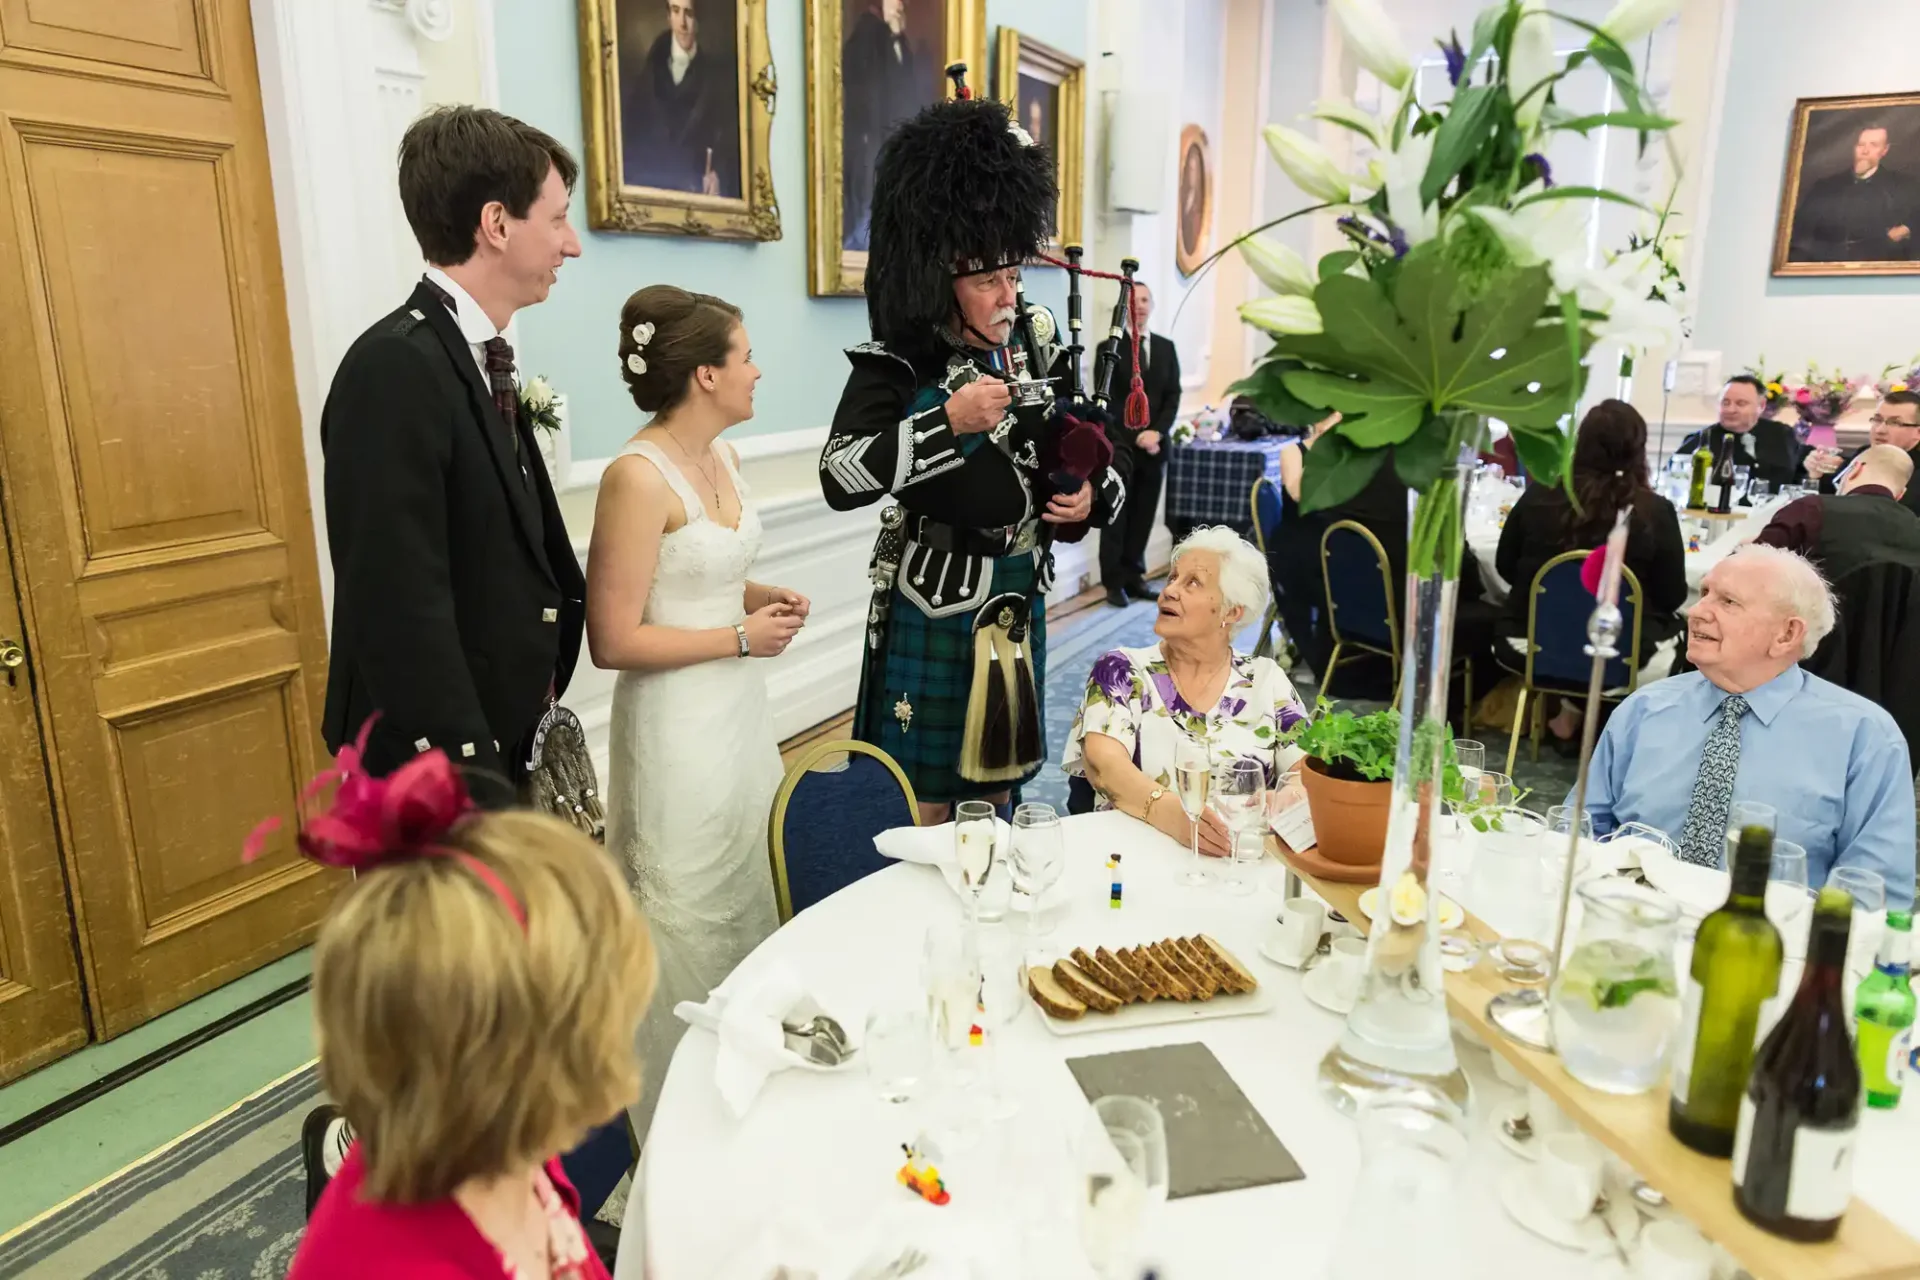 A bagpiper in traditional scottish attire performing at a wedding reception with guests watching.